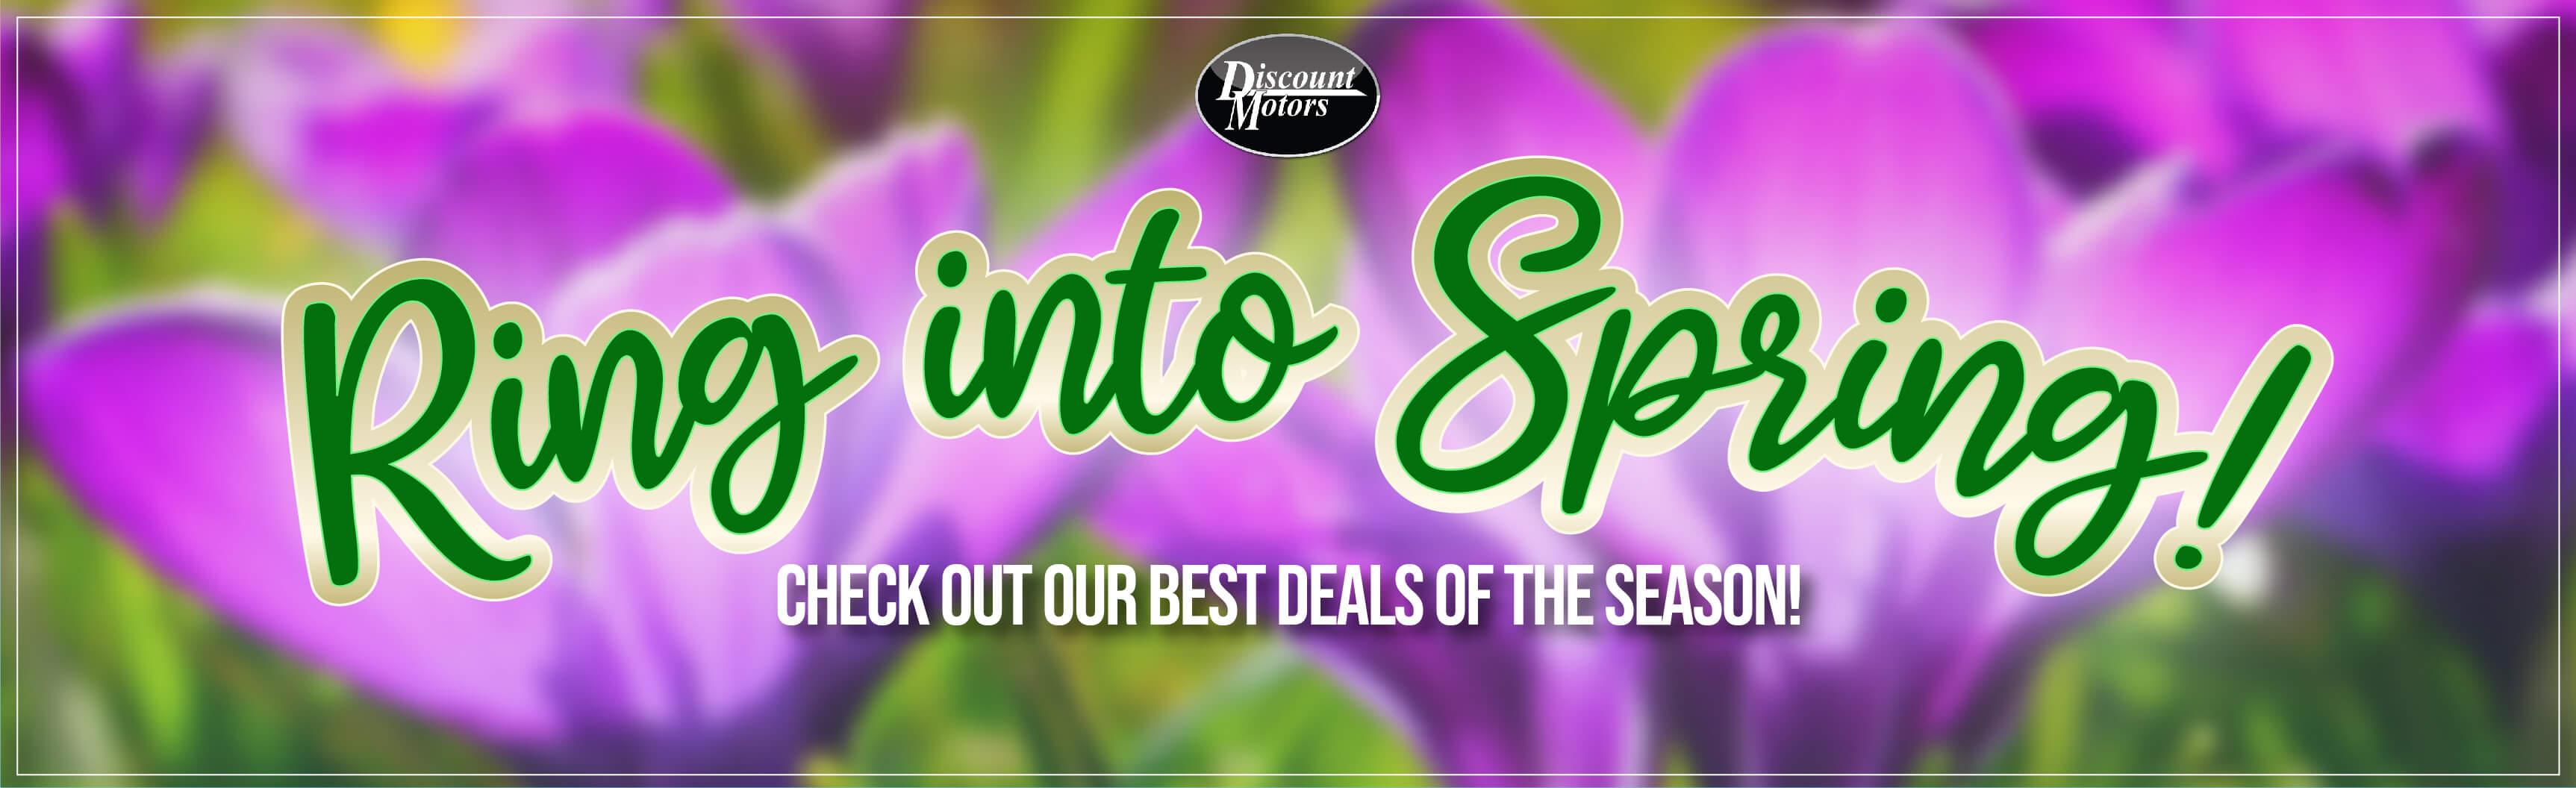 Ring Into Spring! Check out Discount Motors' Best Deals of the Season